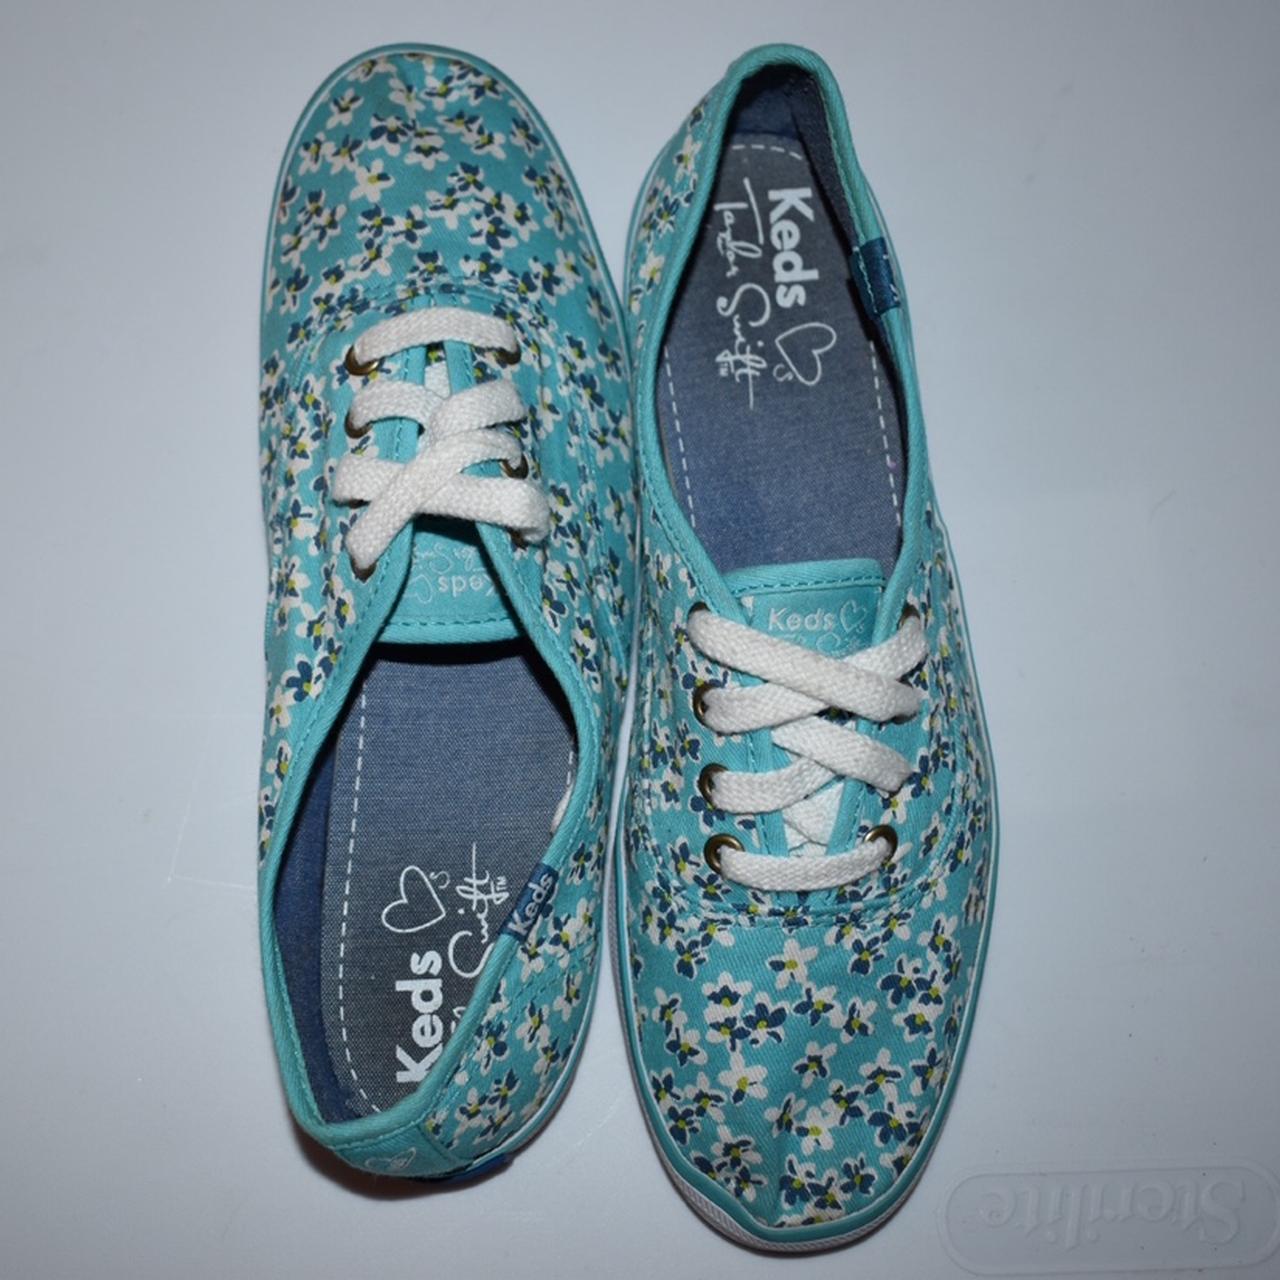 Taylor Swift Turquoise Floral Keds Shoes These were... - Depop